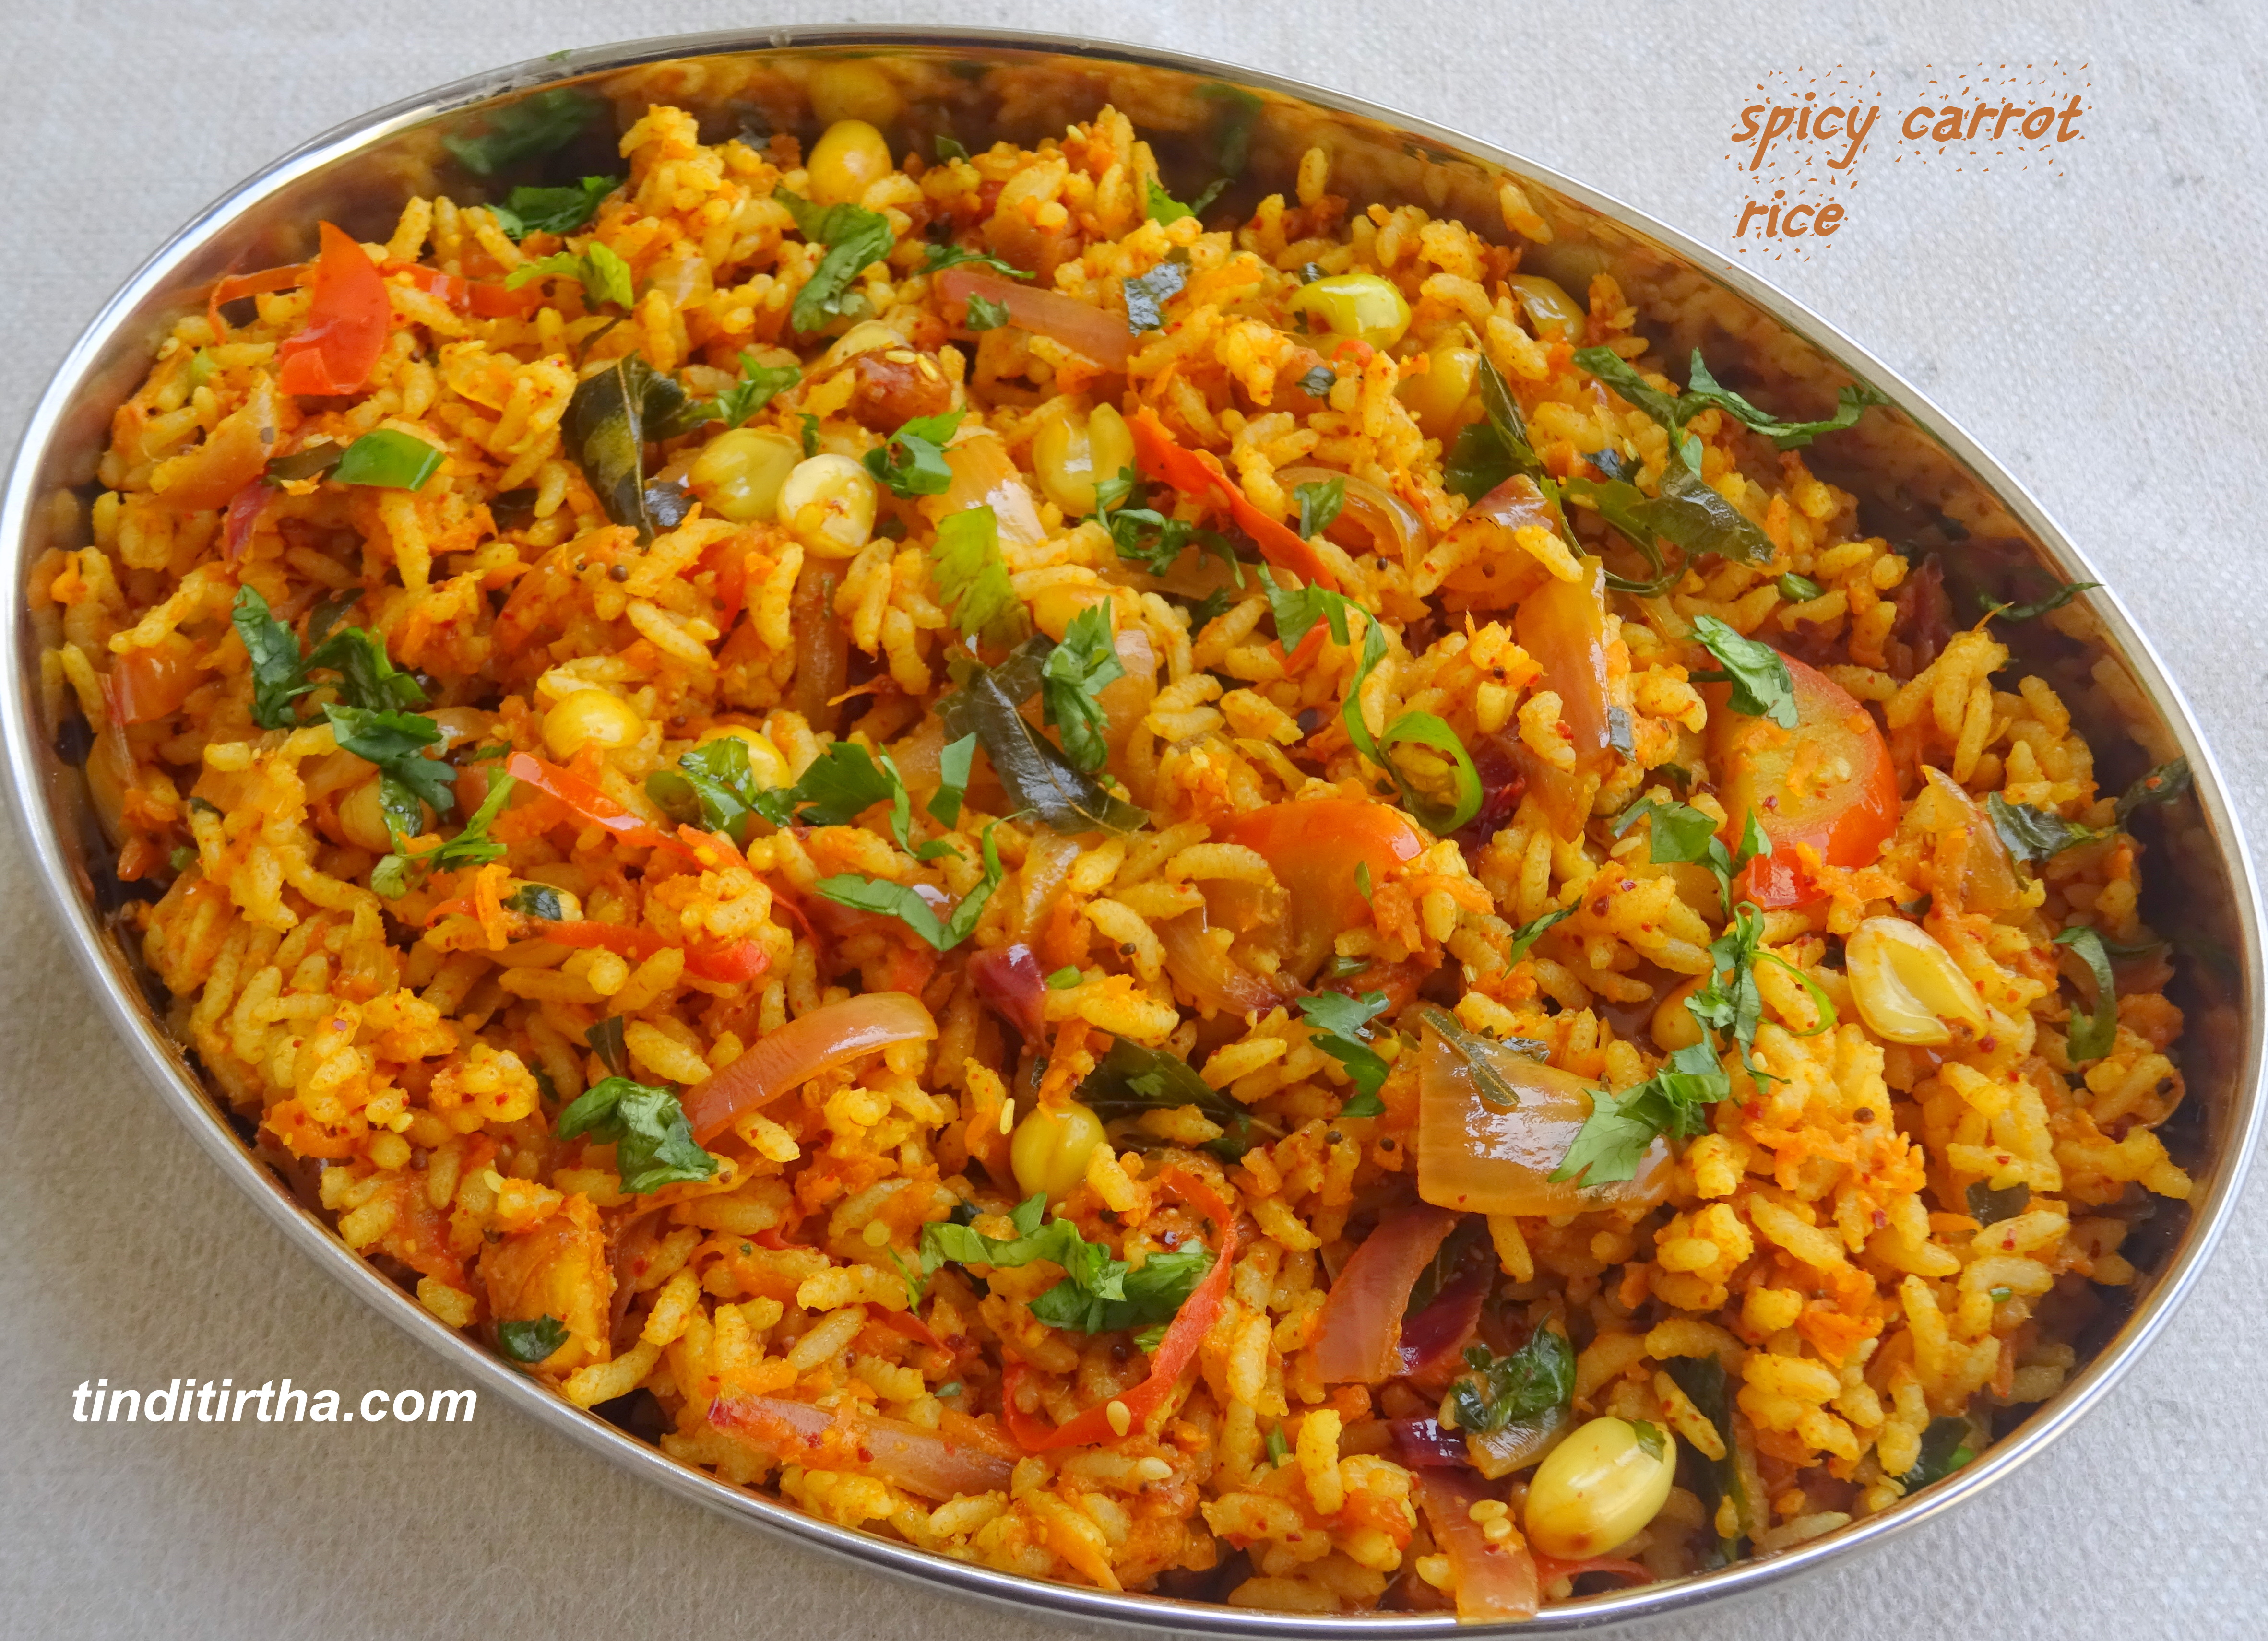 SPICY CARROT RICE aromatic flavorful yummy tasty dish